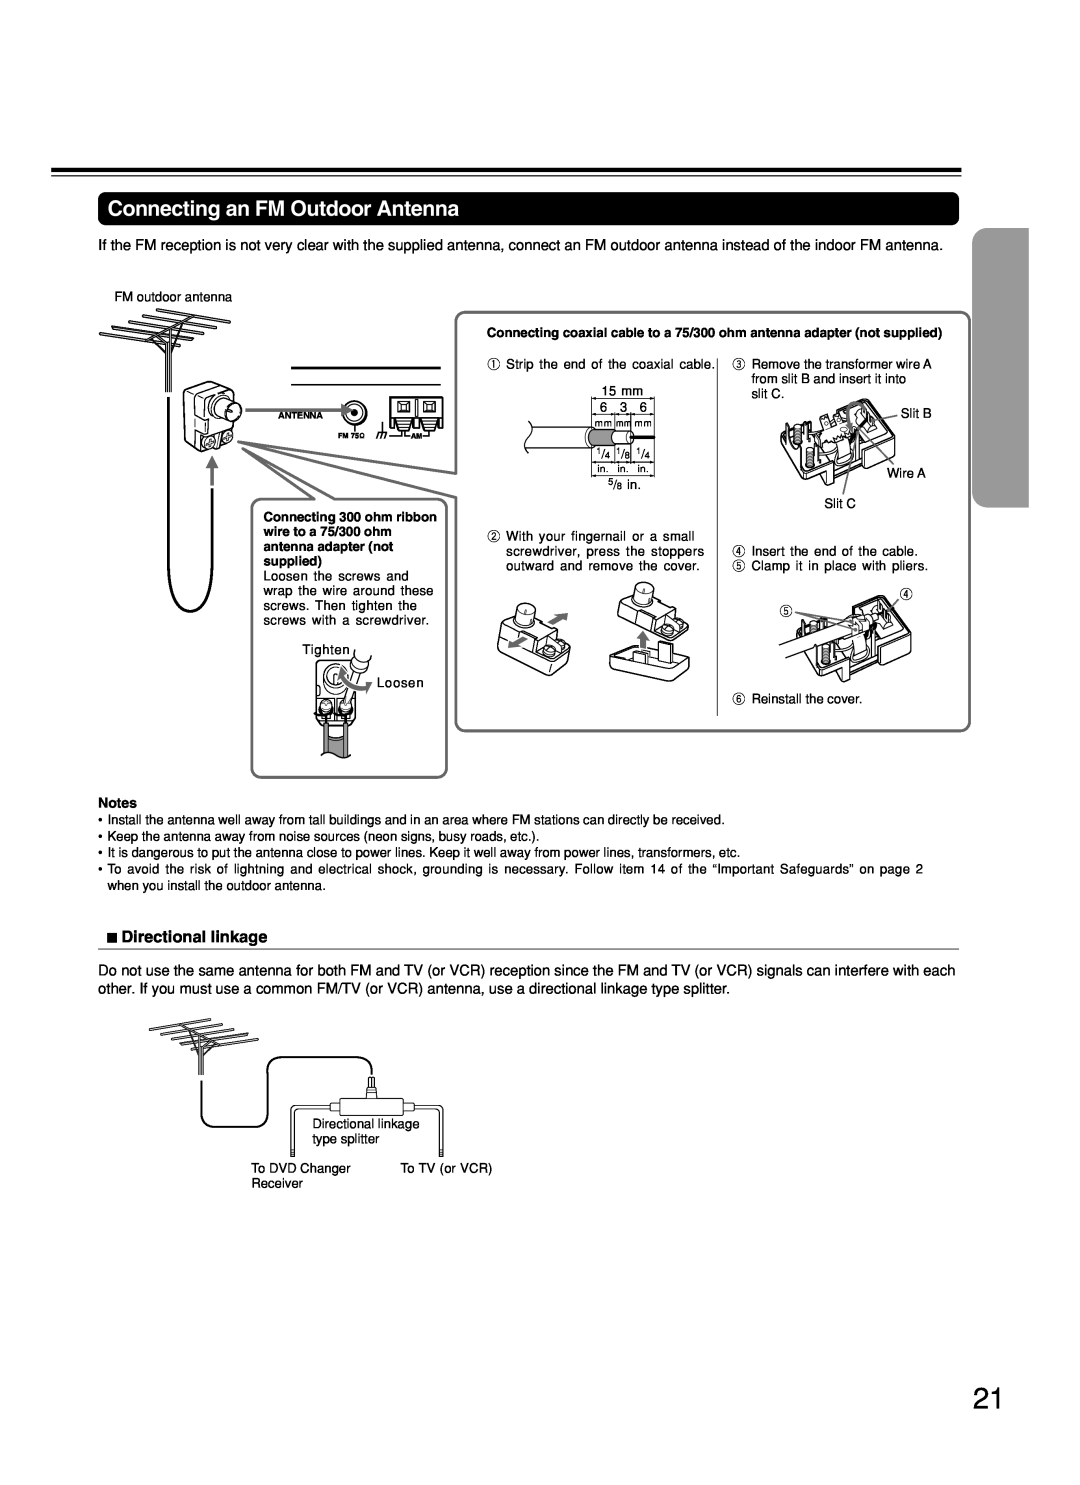 Onkyo DR-C500 instruction manual Connecting an FM Outdoor Antenna, Directional Iinkage 